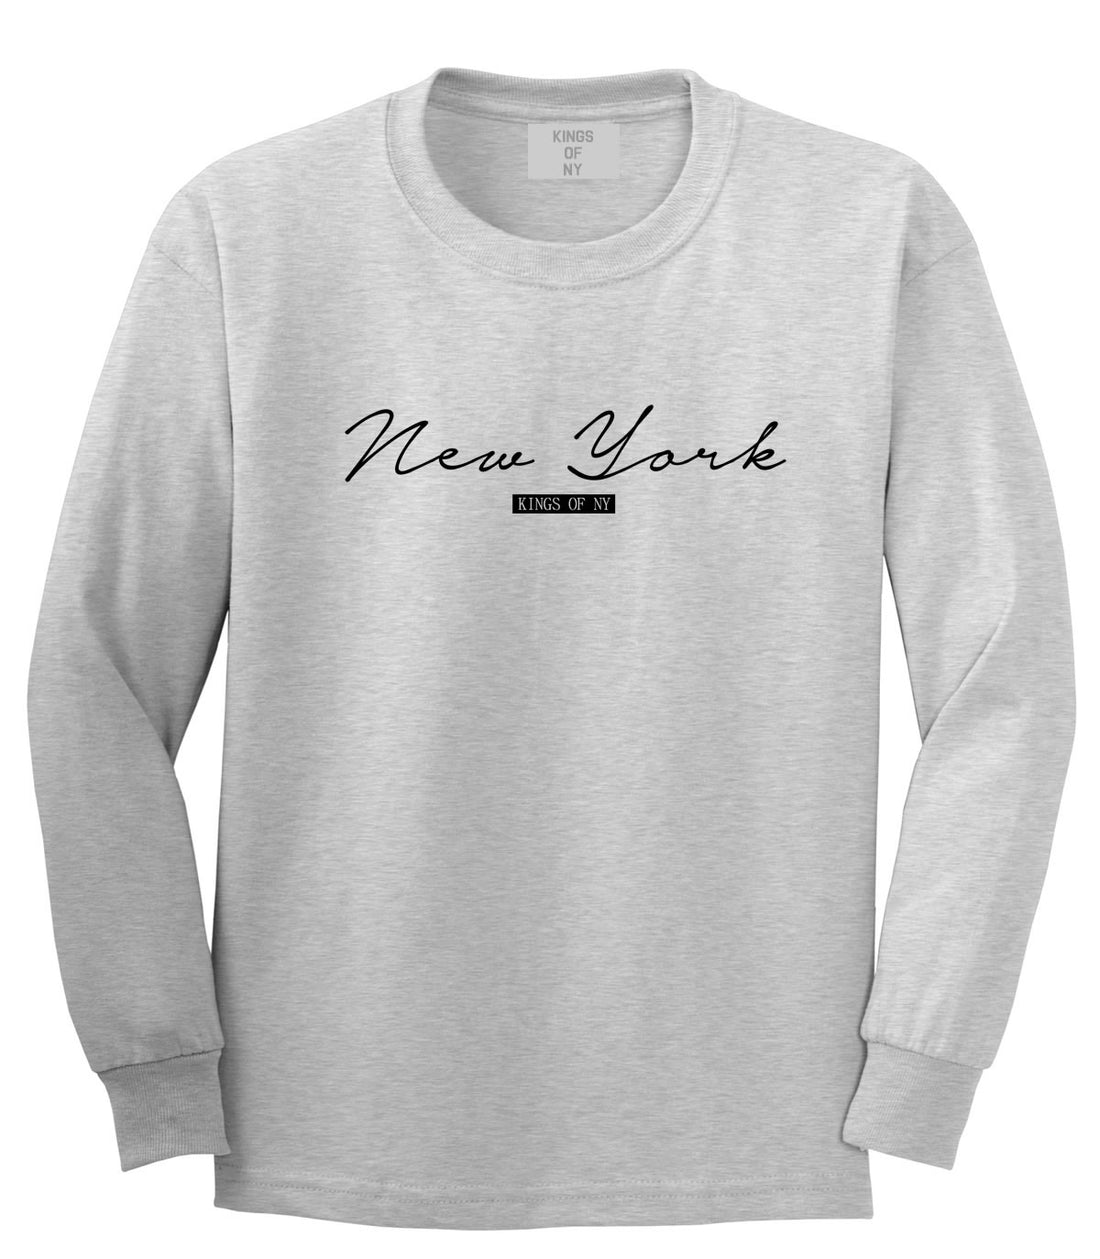 Kings Of NY New York Script Typography Long Sleeve T-Shirt in Grey